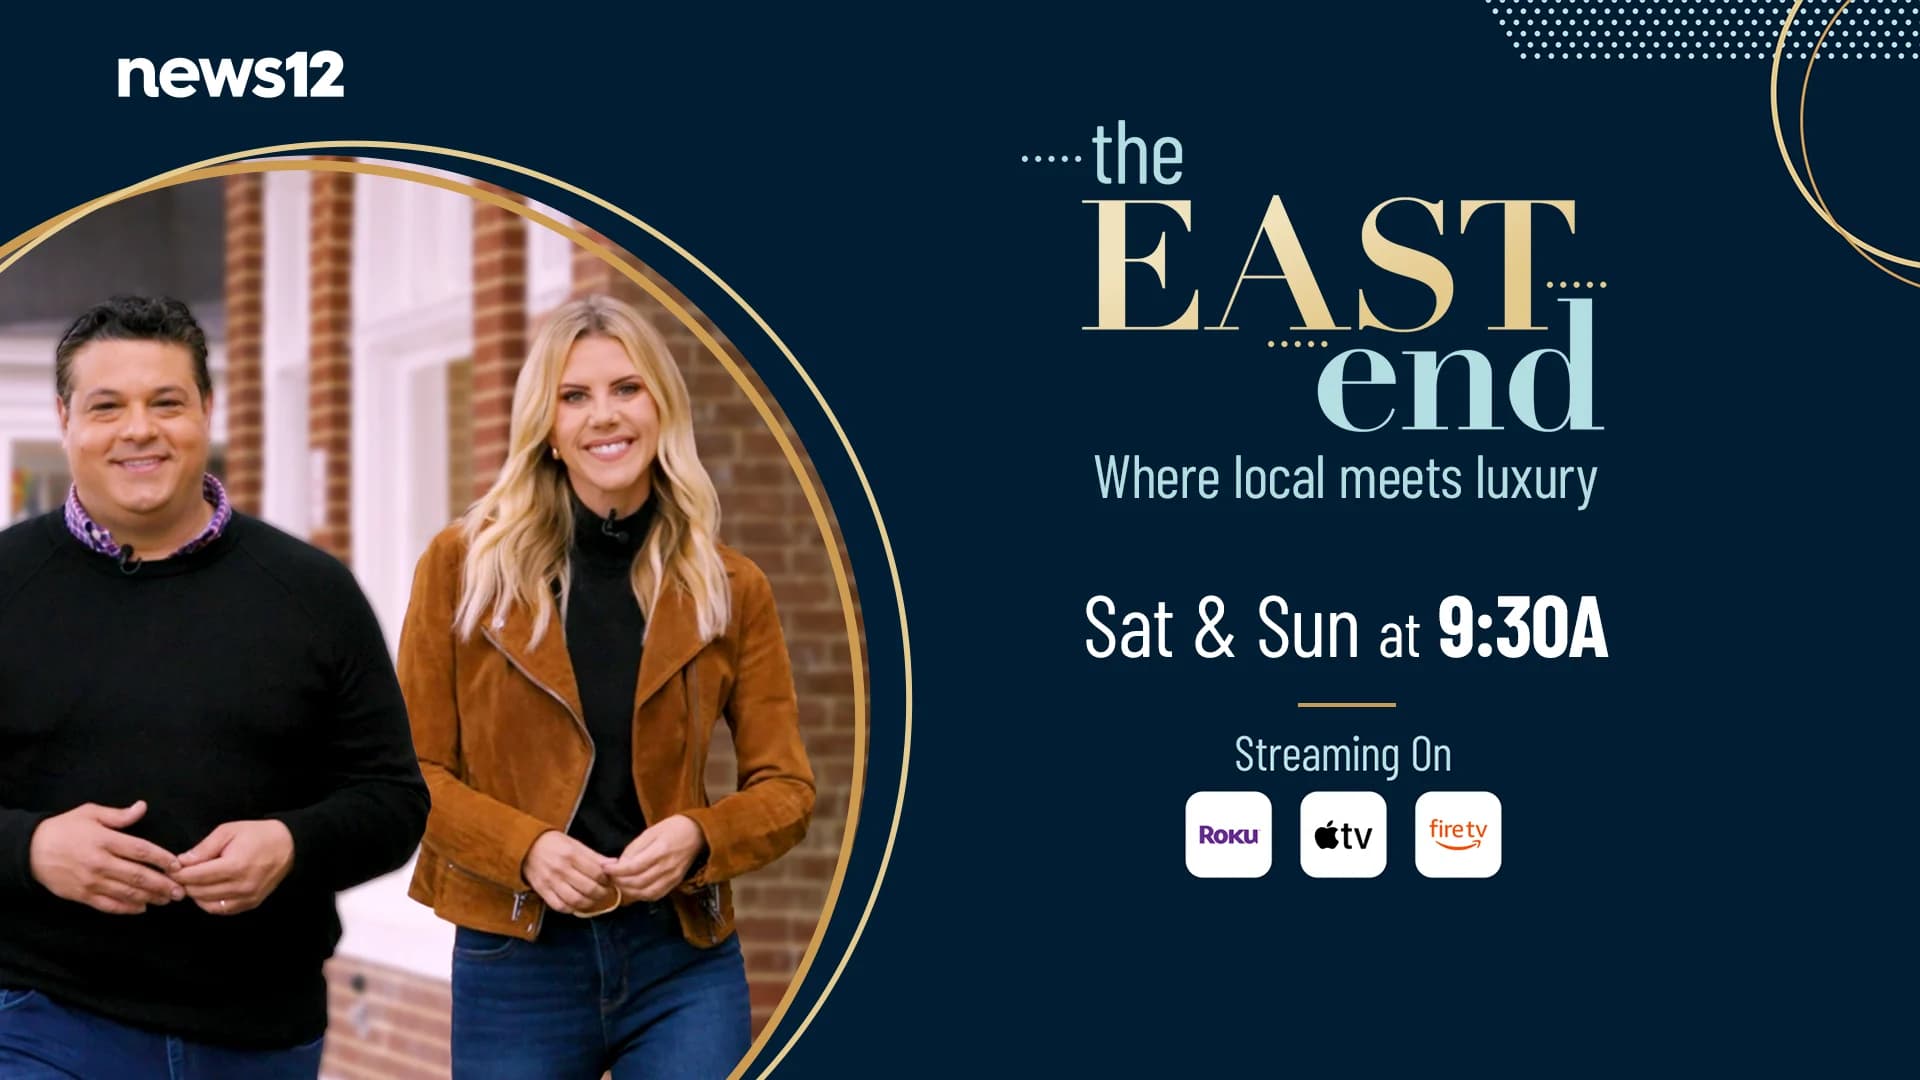 Wine, horseback riding, oyster harvesting and more - another chance to watch the latest 'East End' episode Saturday and Sunday!